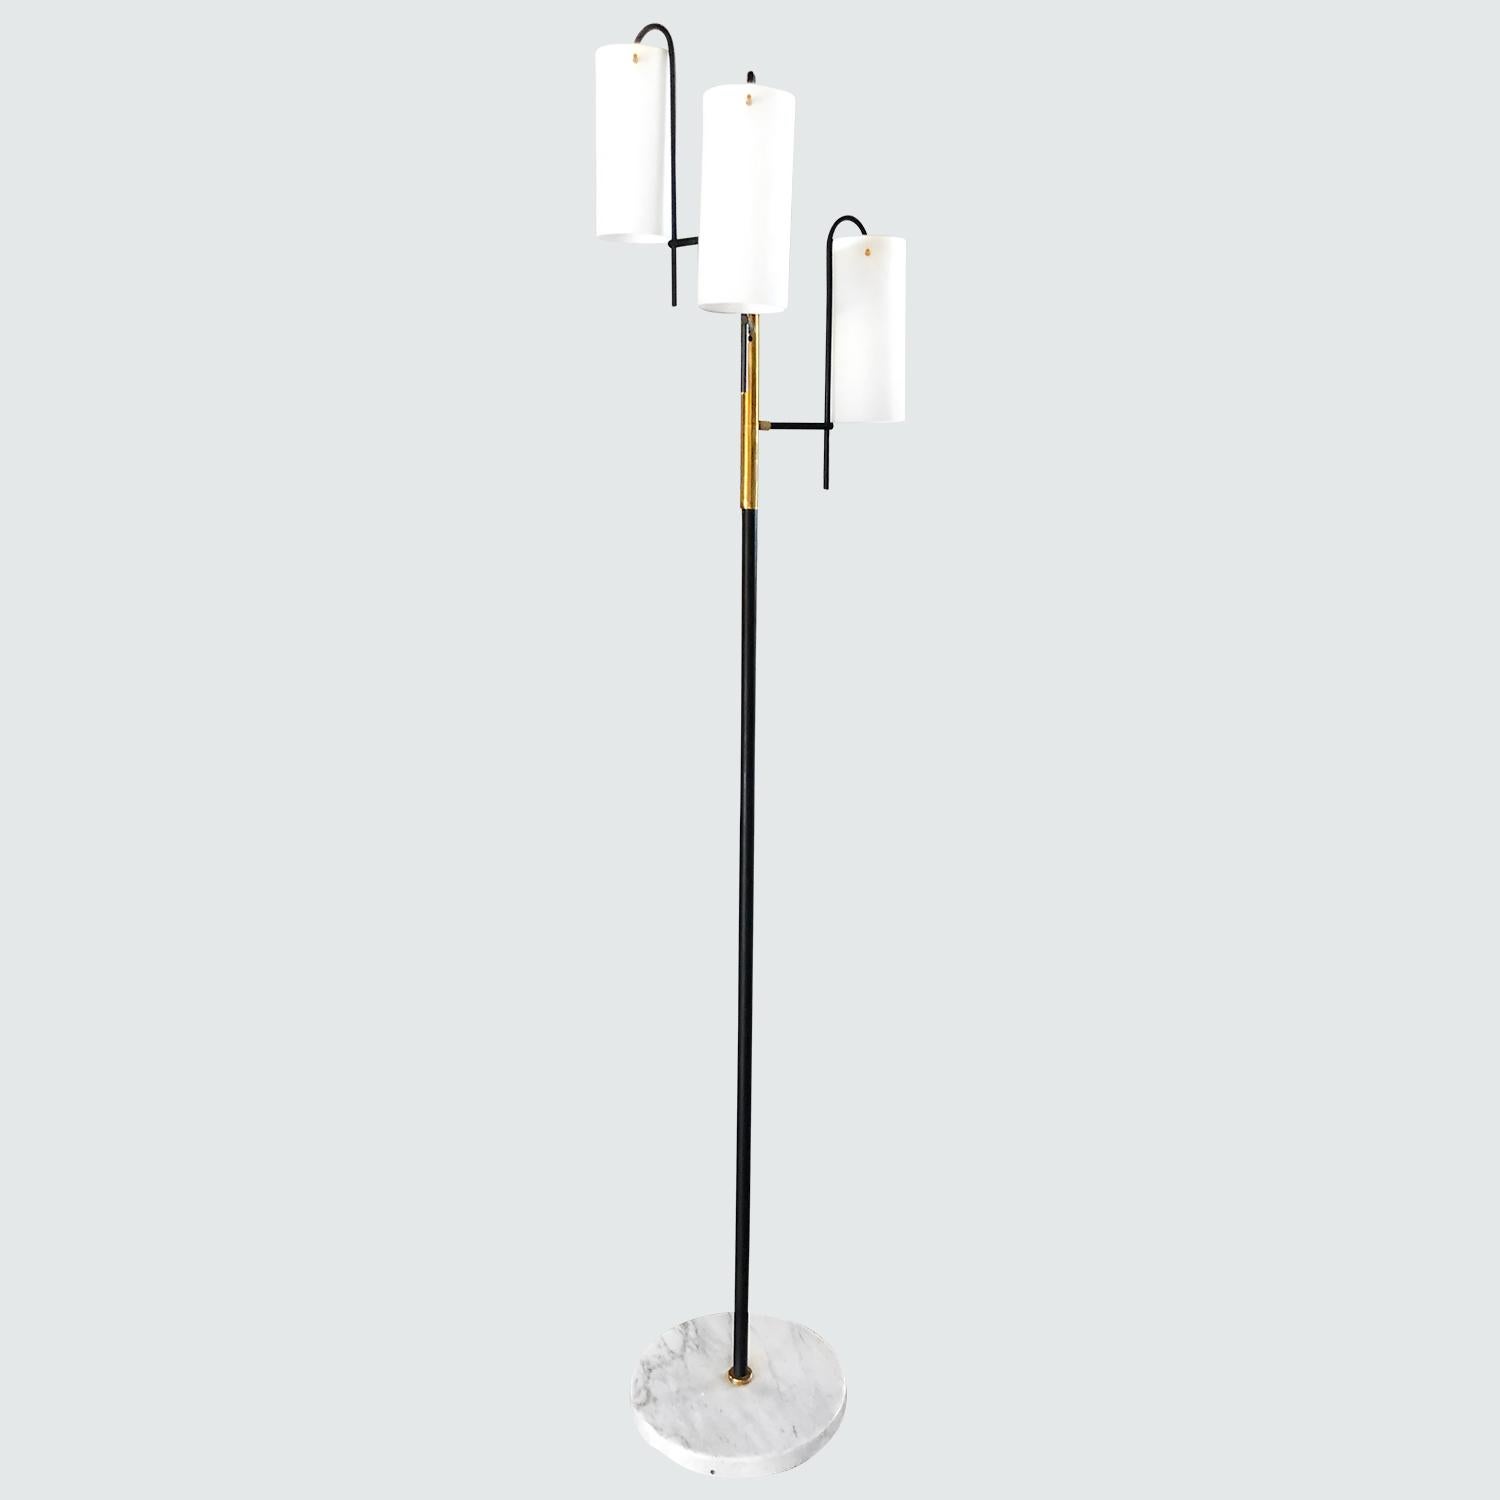 A vintage Mid-Century Modern Italian floor lamp made of a metal frame and brass, having three slightly curved arms with frosted, cylindrical opal glass shade which creates an astonishing light display. Produced by Stilnovo, each shade is featuring a